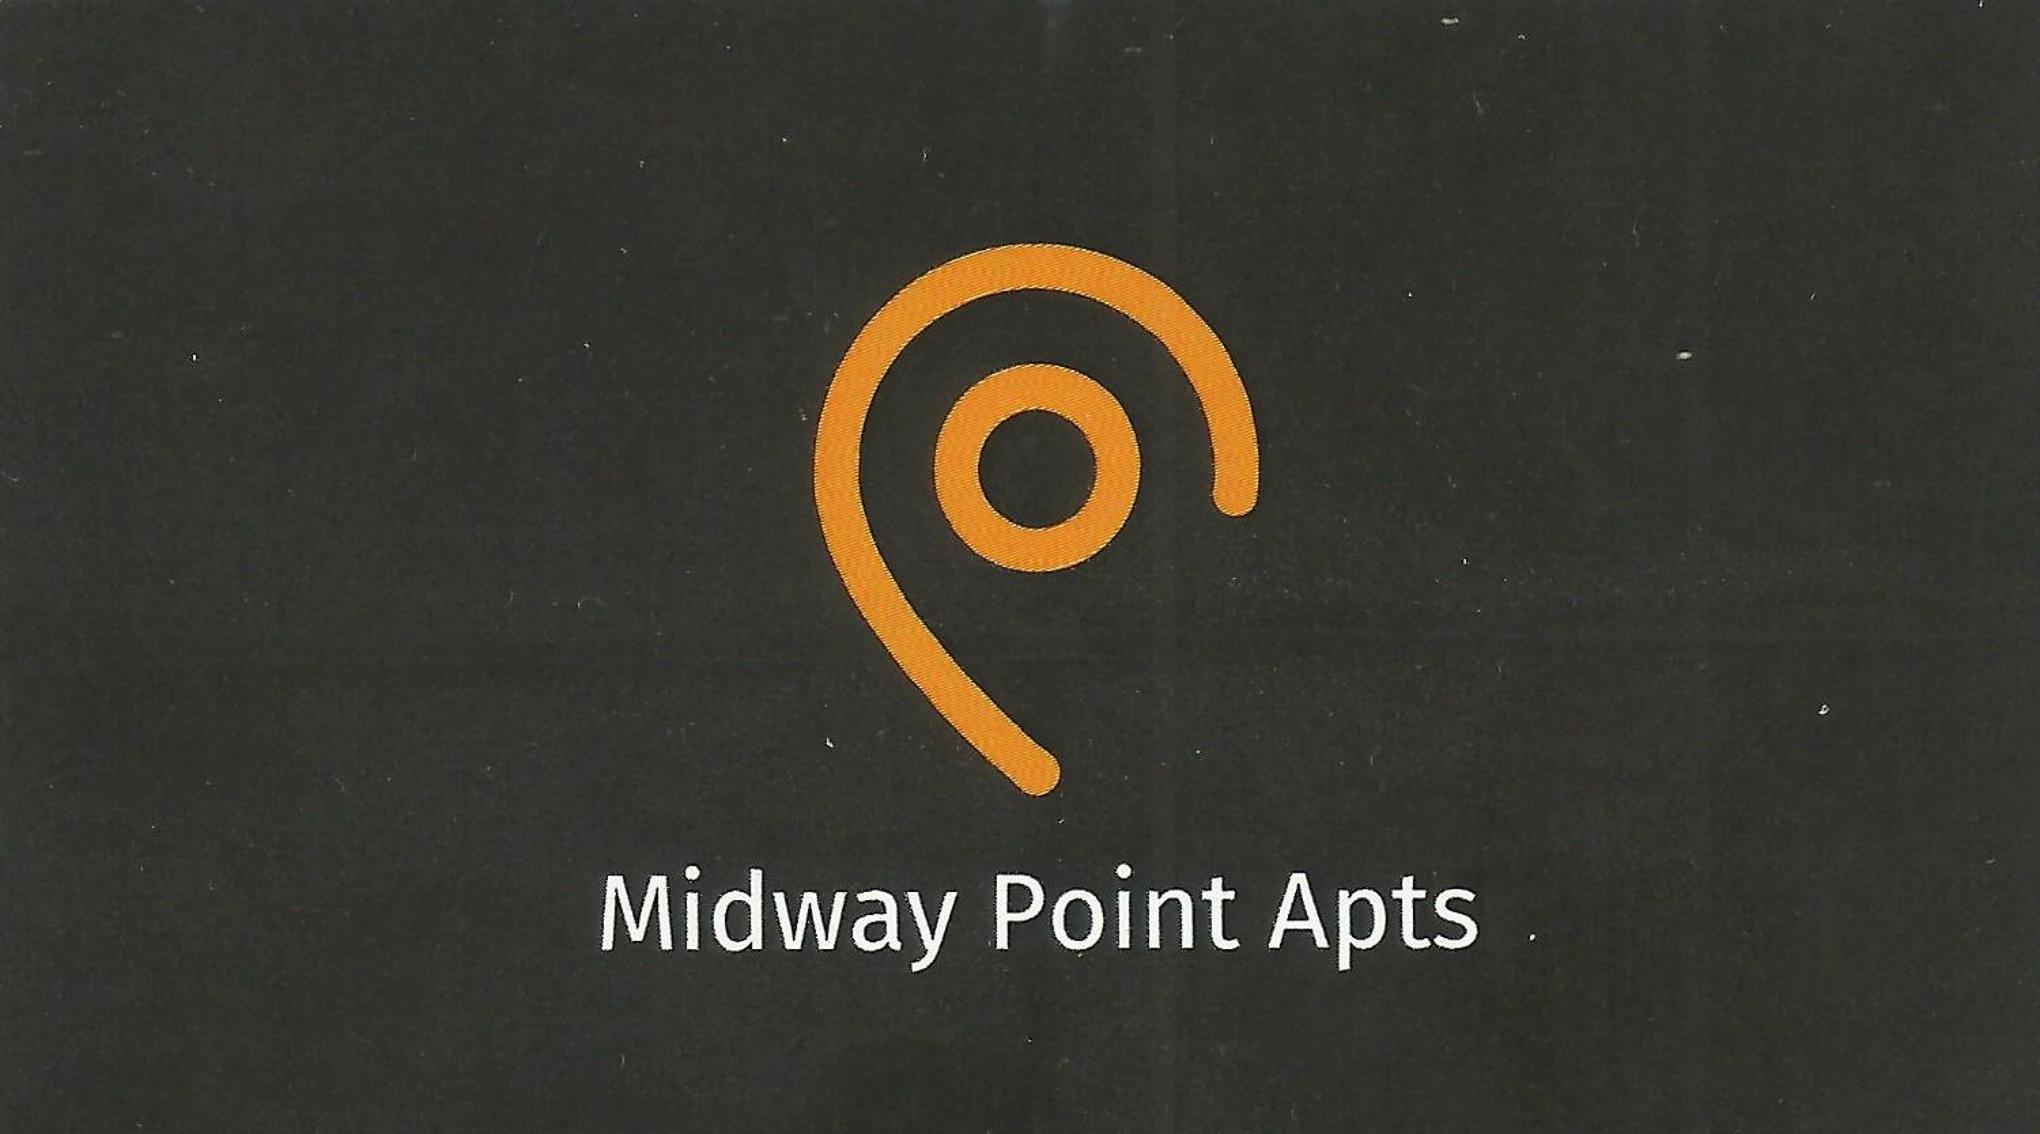 Midway Point Apts